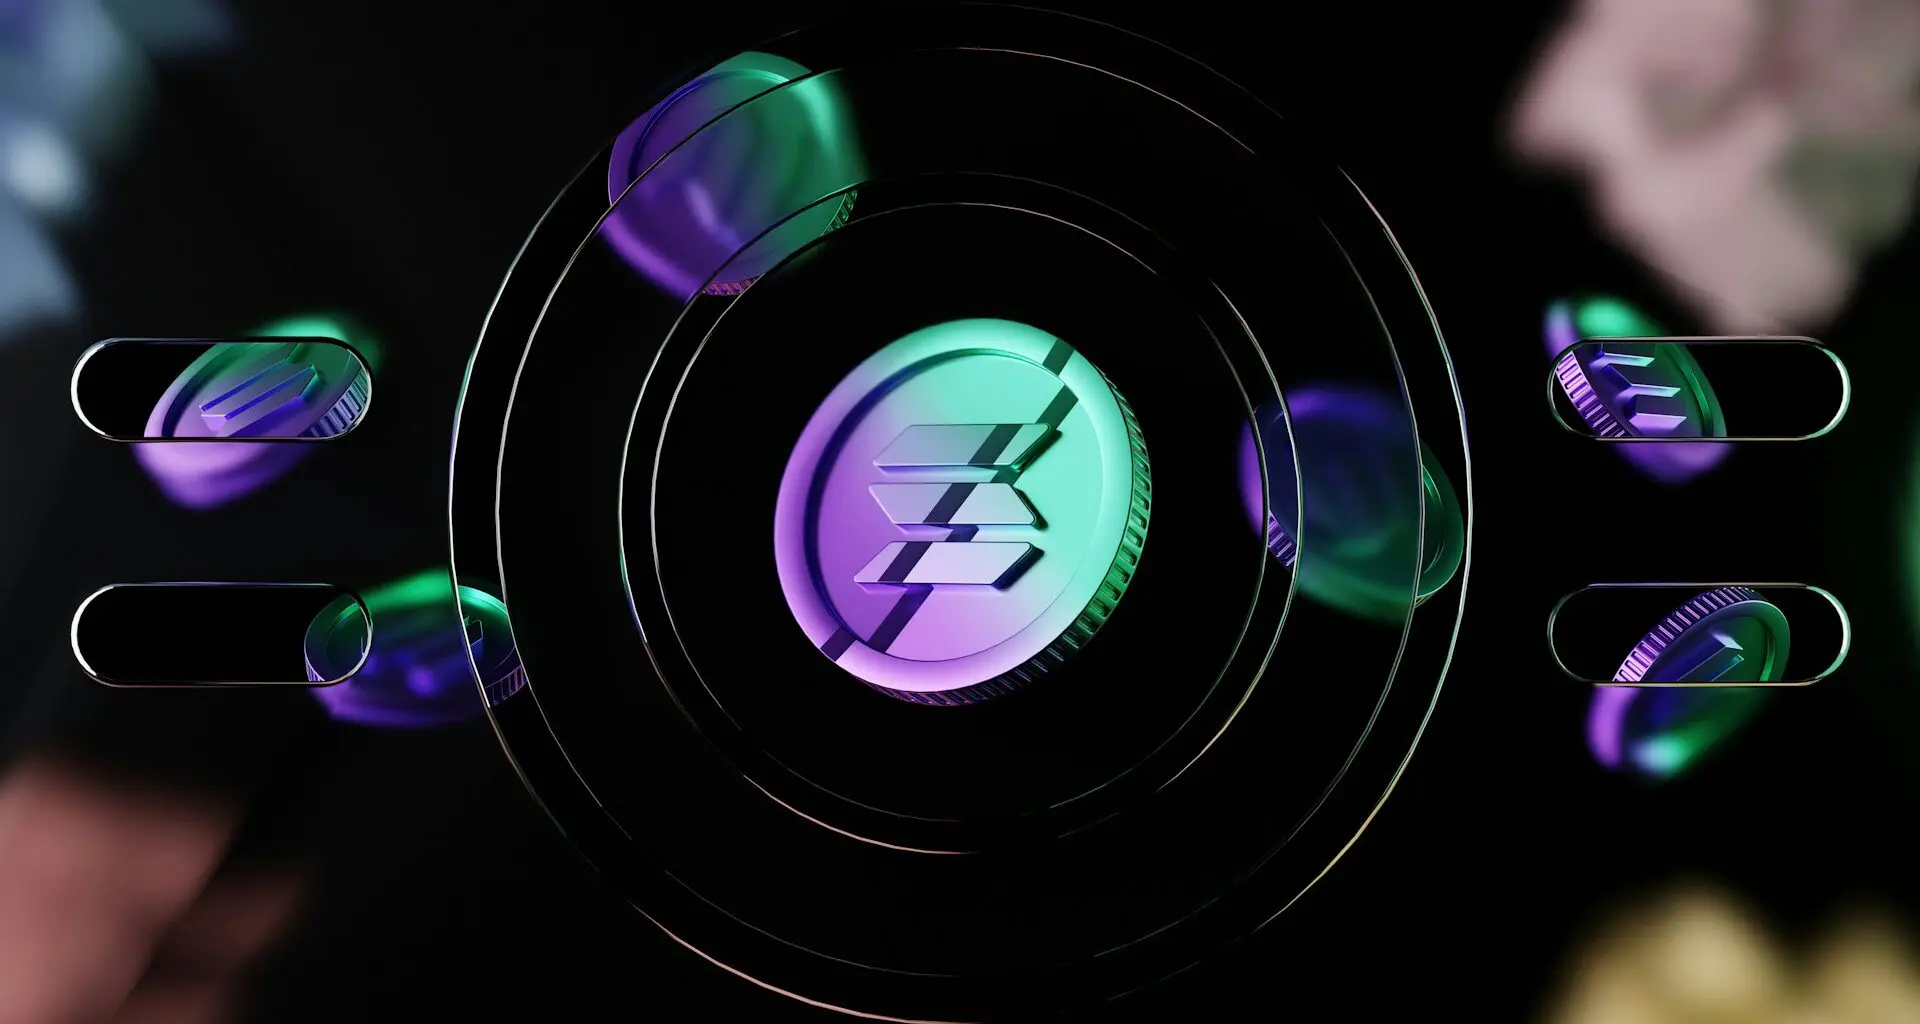 The image features a digital representation of the Solana cryptocurrency logo surrounded by abstract circular designs and floating holographic elements.